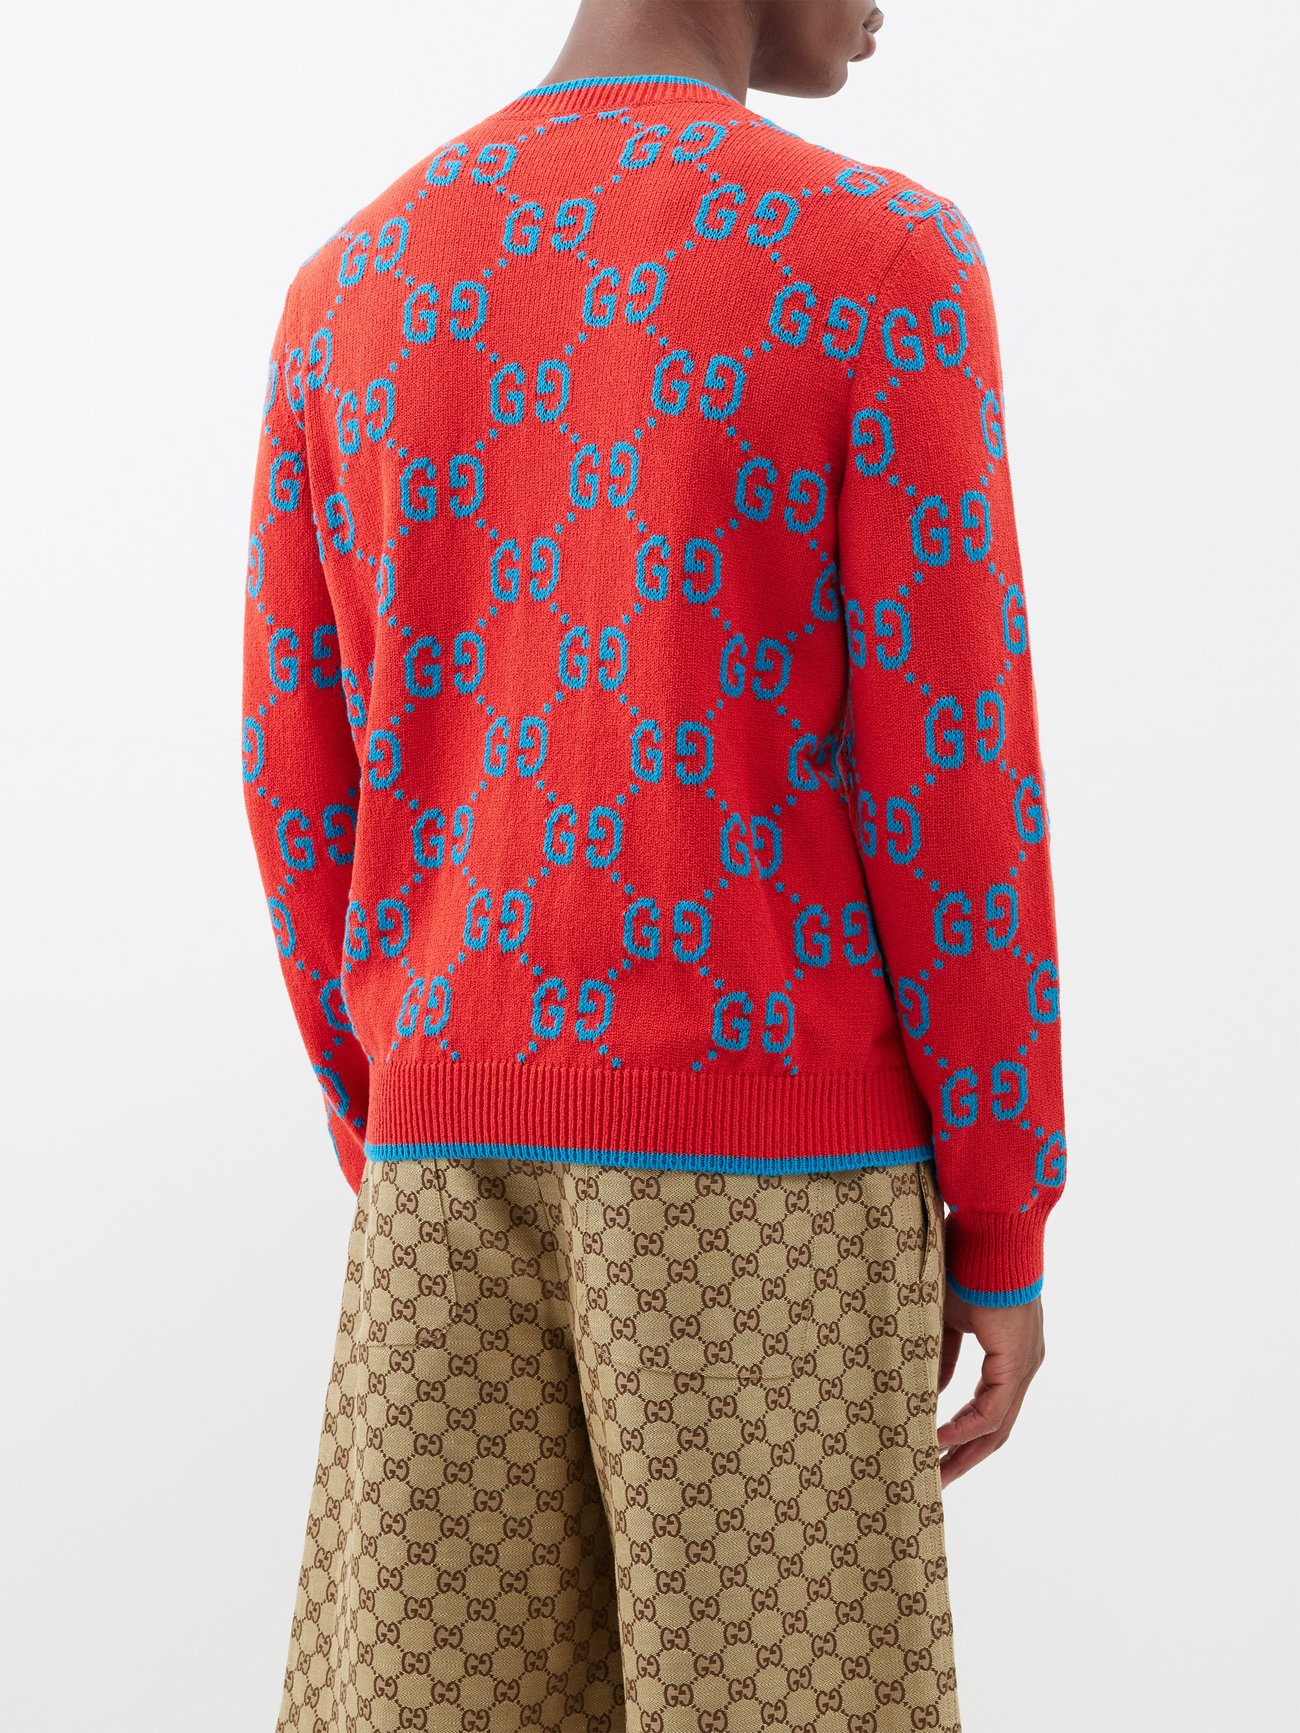 GG Intarsia Cotton Blend Sweater in Red - Gucci